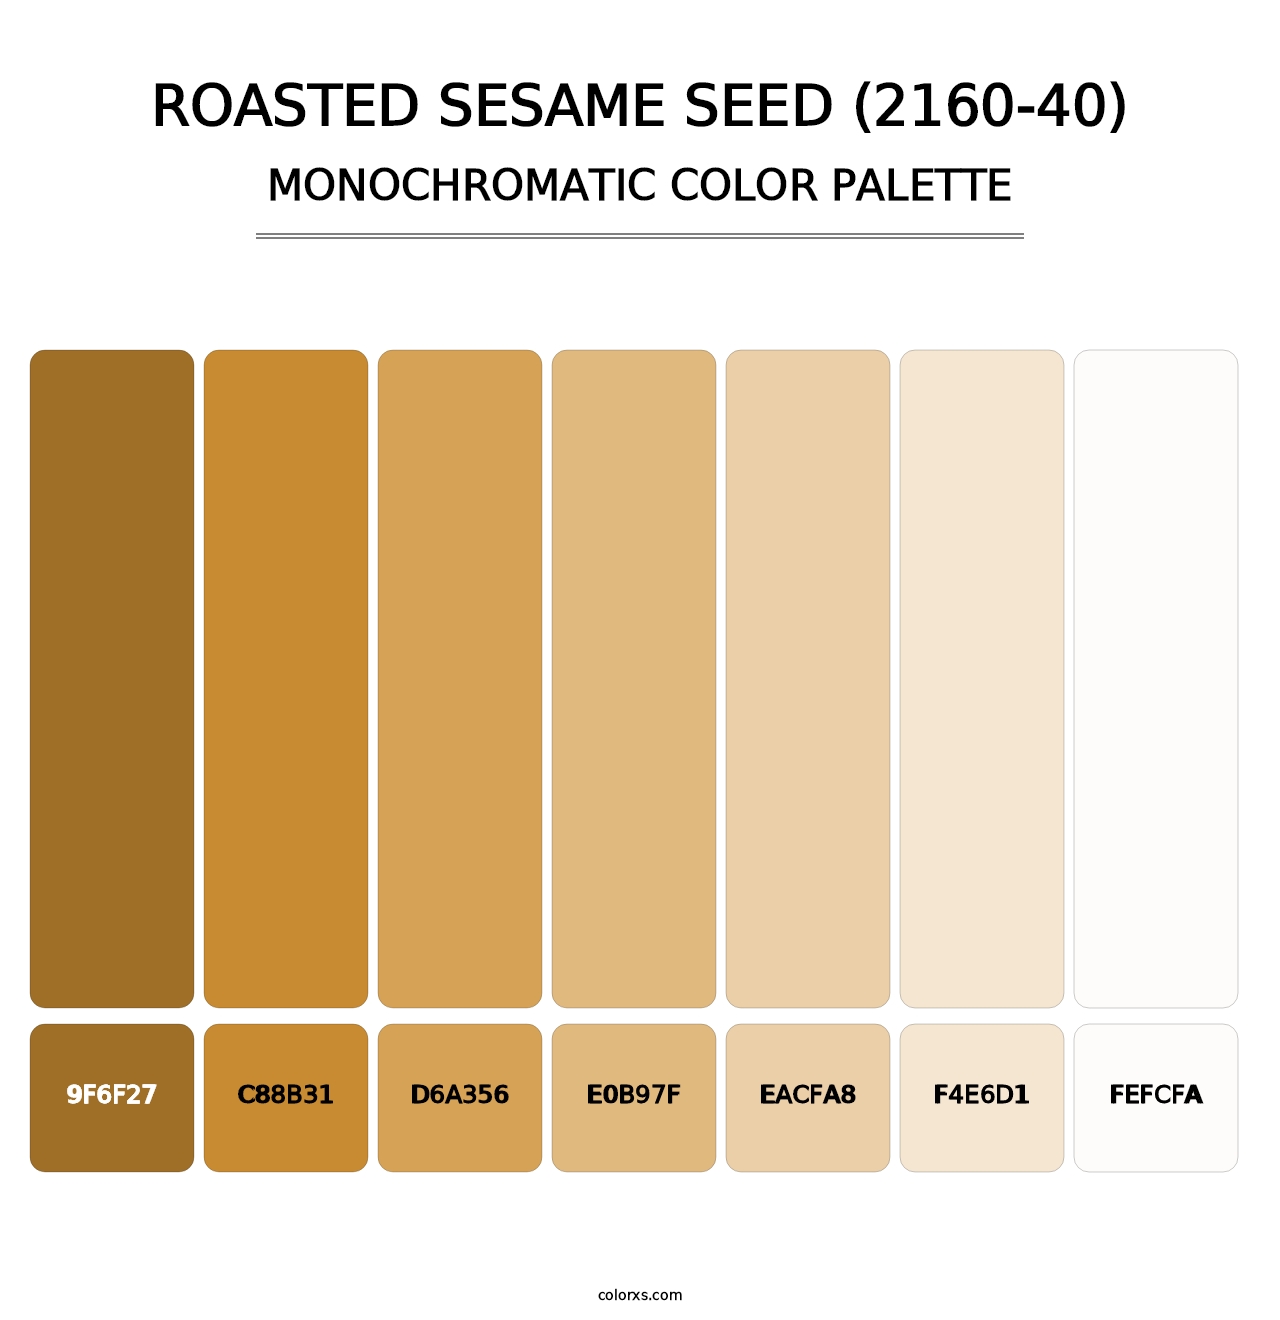 Roasted Sesame Seed (2160-40) - Monochromatic Color Palette